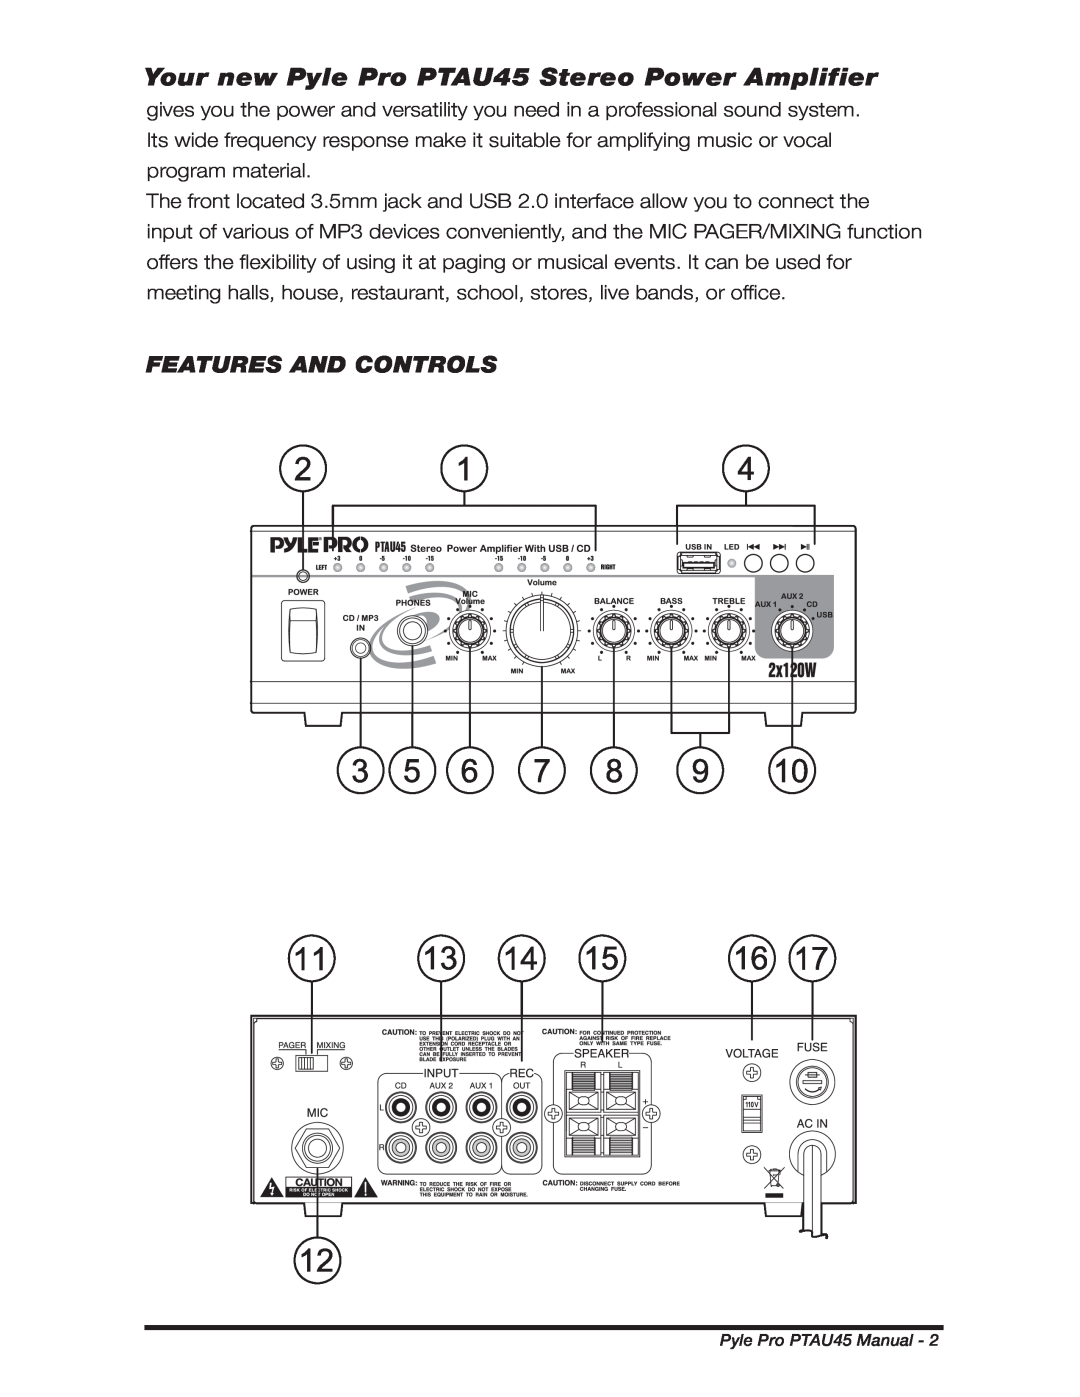 PYLE Audio manual Features And Controls, Your new Pyle Pro PTAU45 Stereo Power Amplifier 